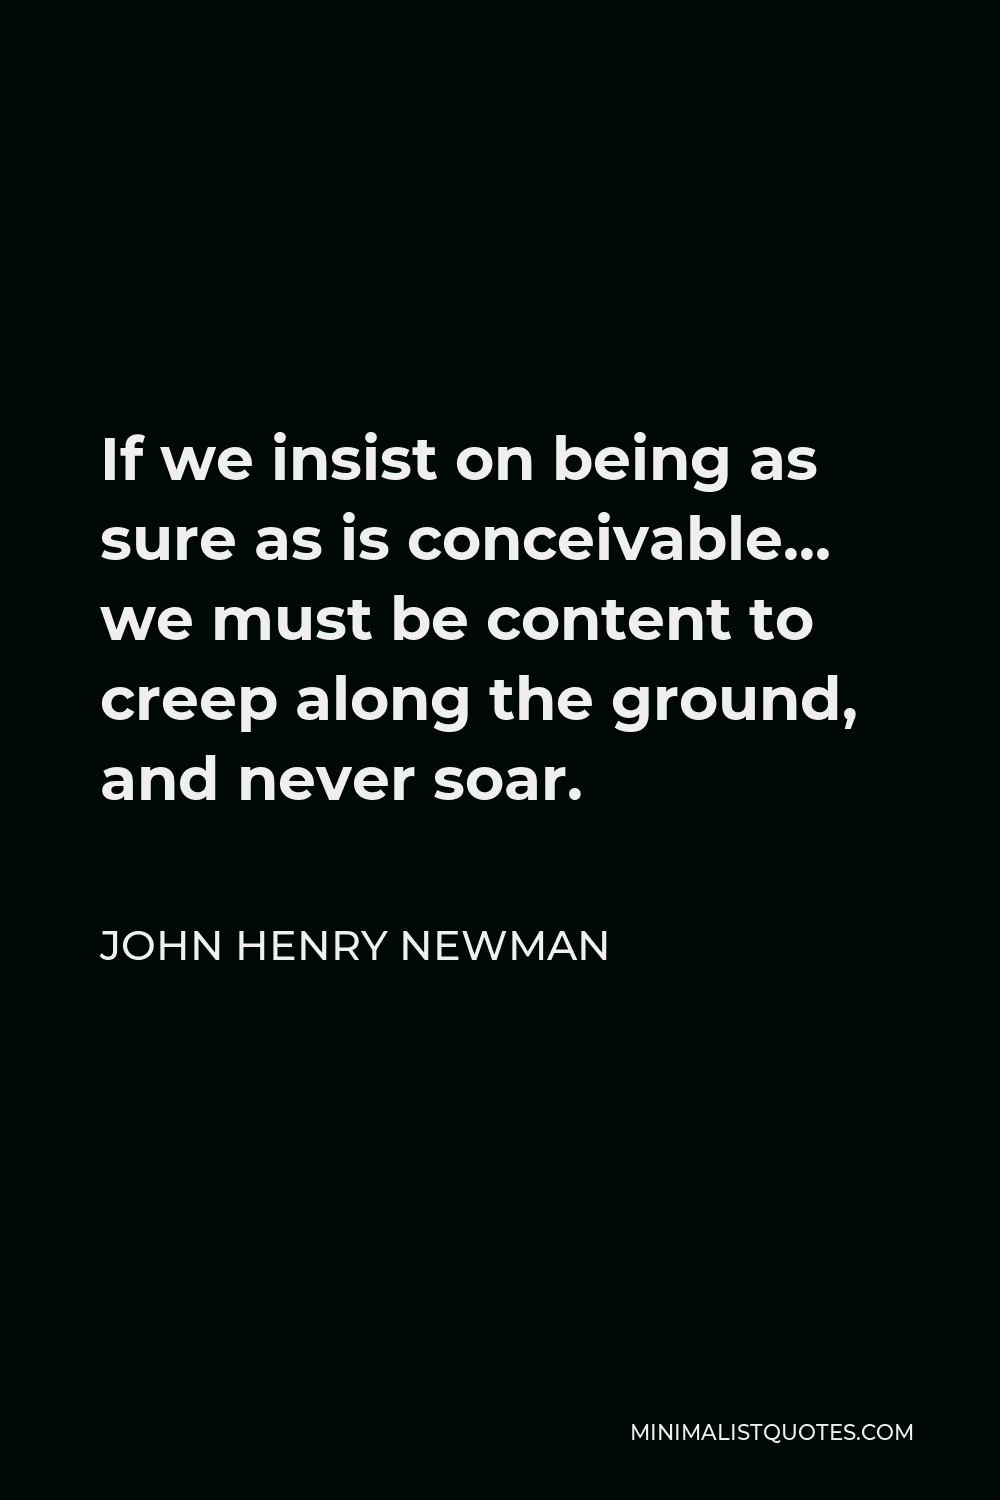 John Henry Newman Quote - If we insist on being as sure as is conceivable… we must be content to creep along the ground, and never soar.